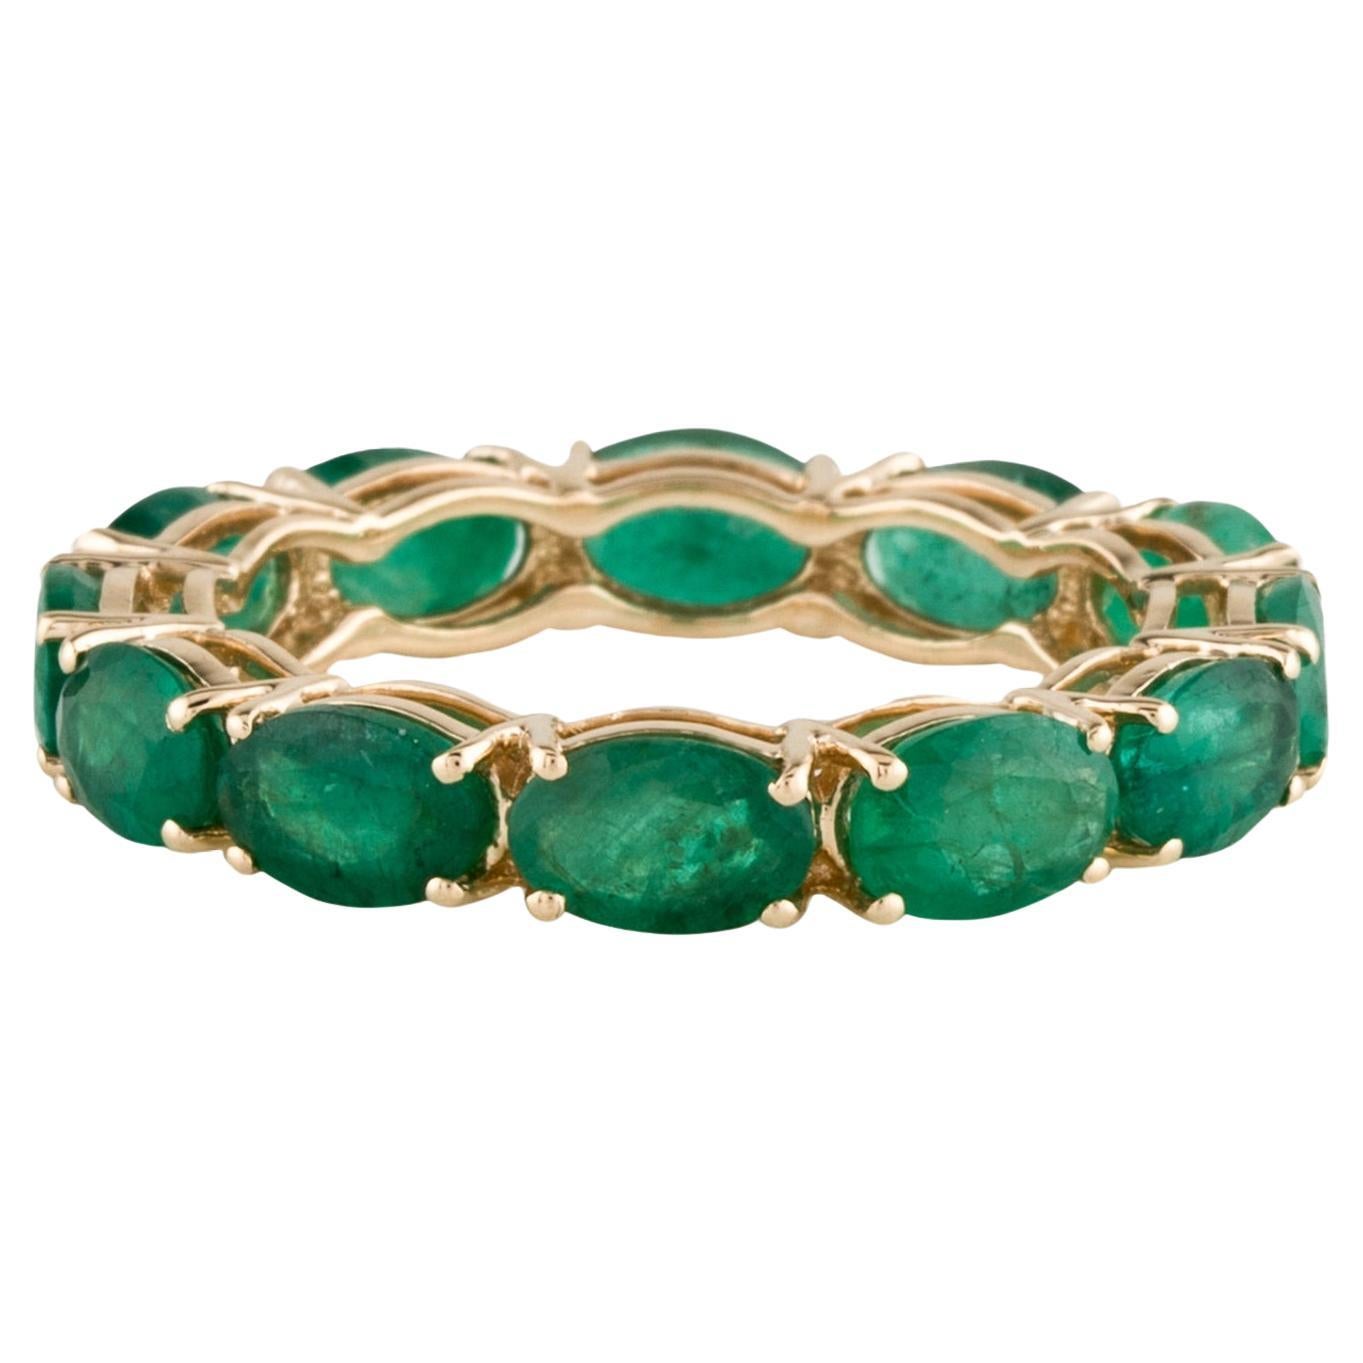 Exquisite 14K Gold 3.52ctw Emerald Eternity Band Ring - Size 8 - Luxury Jewelry